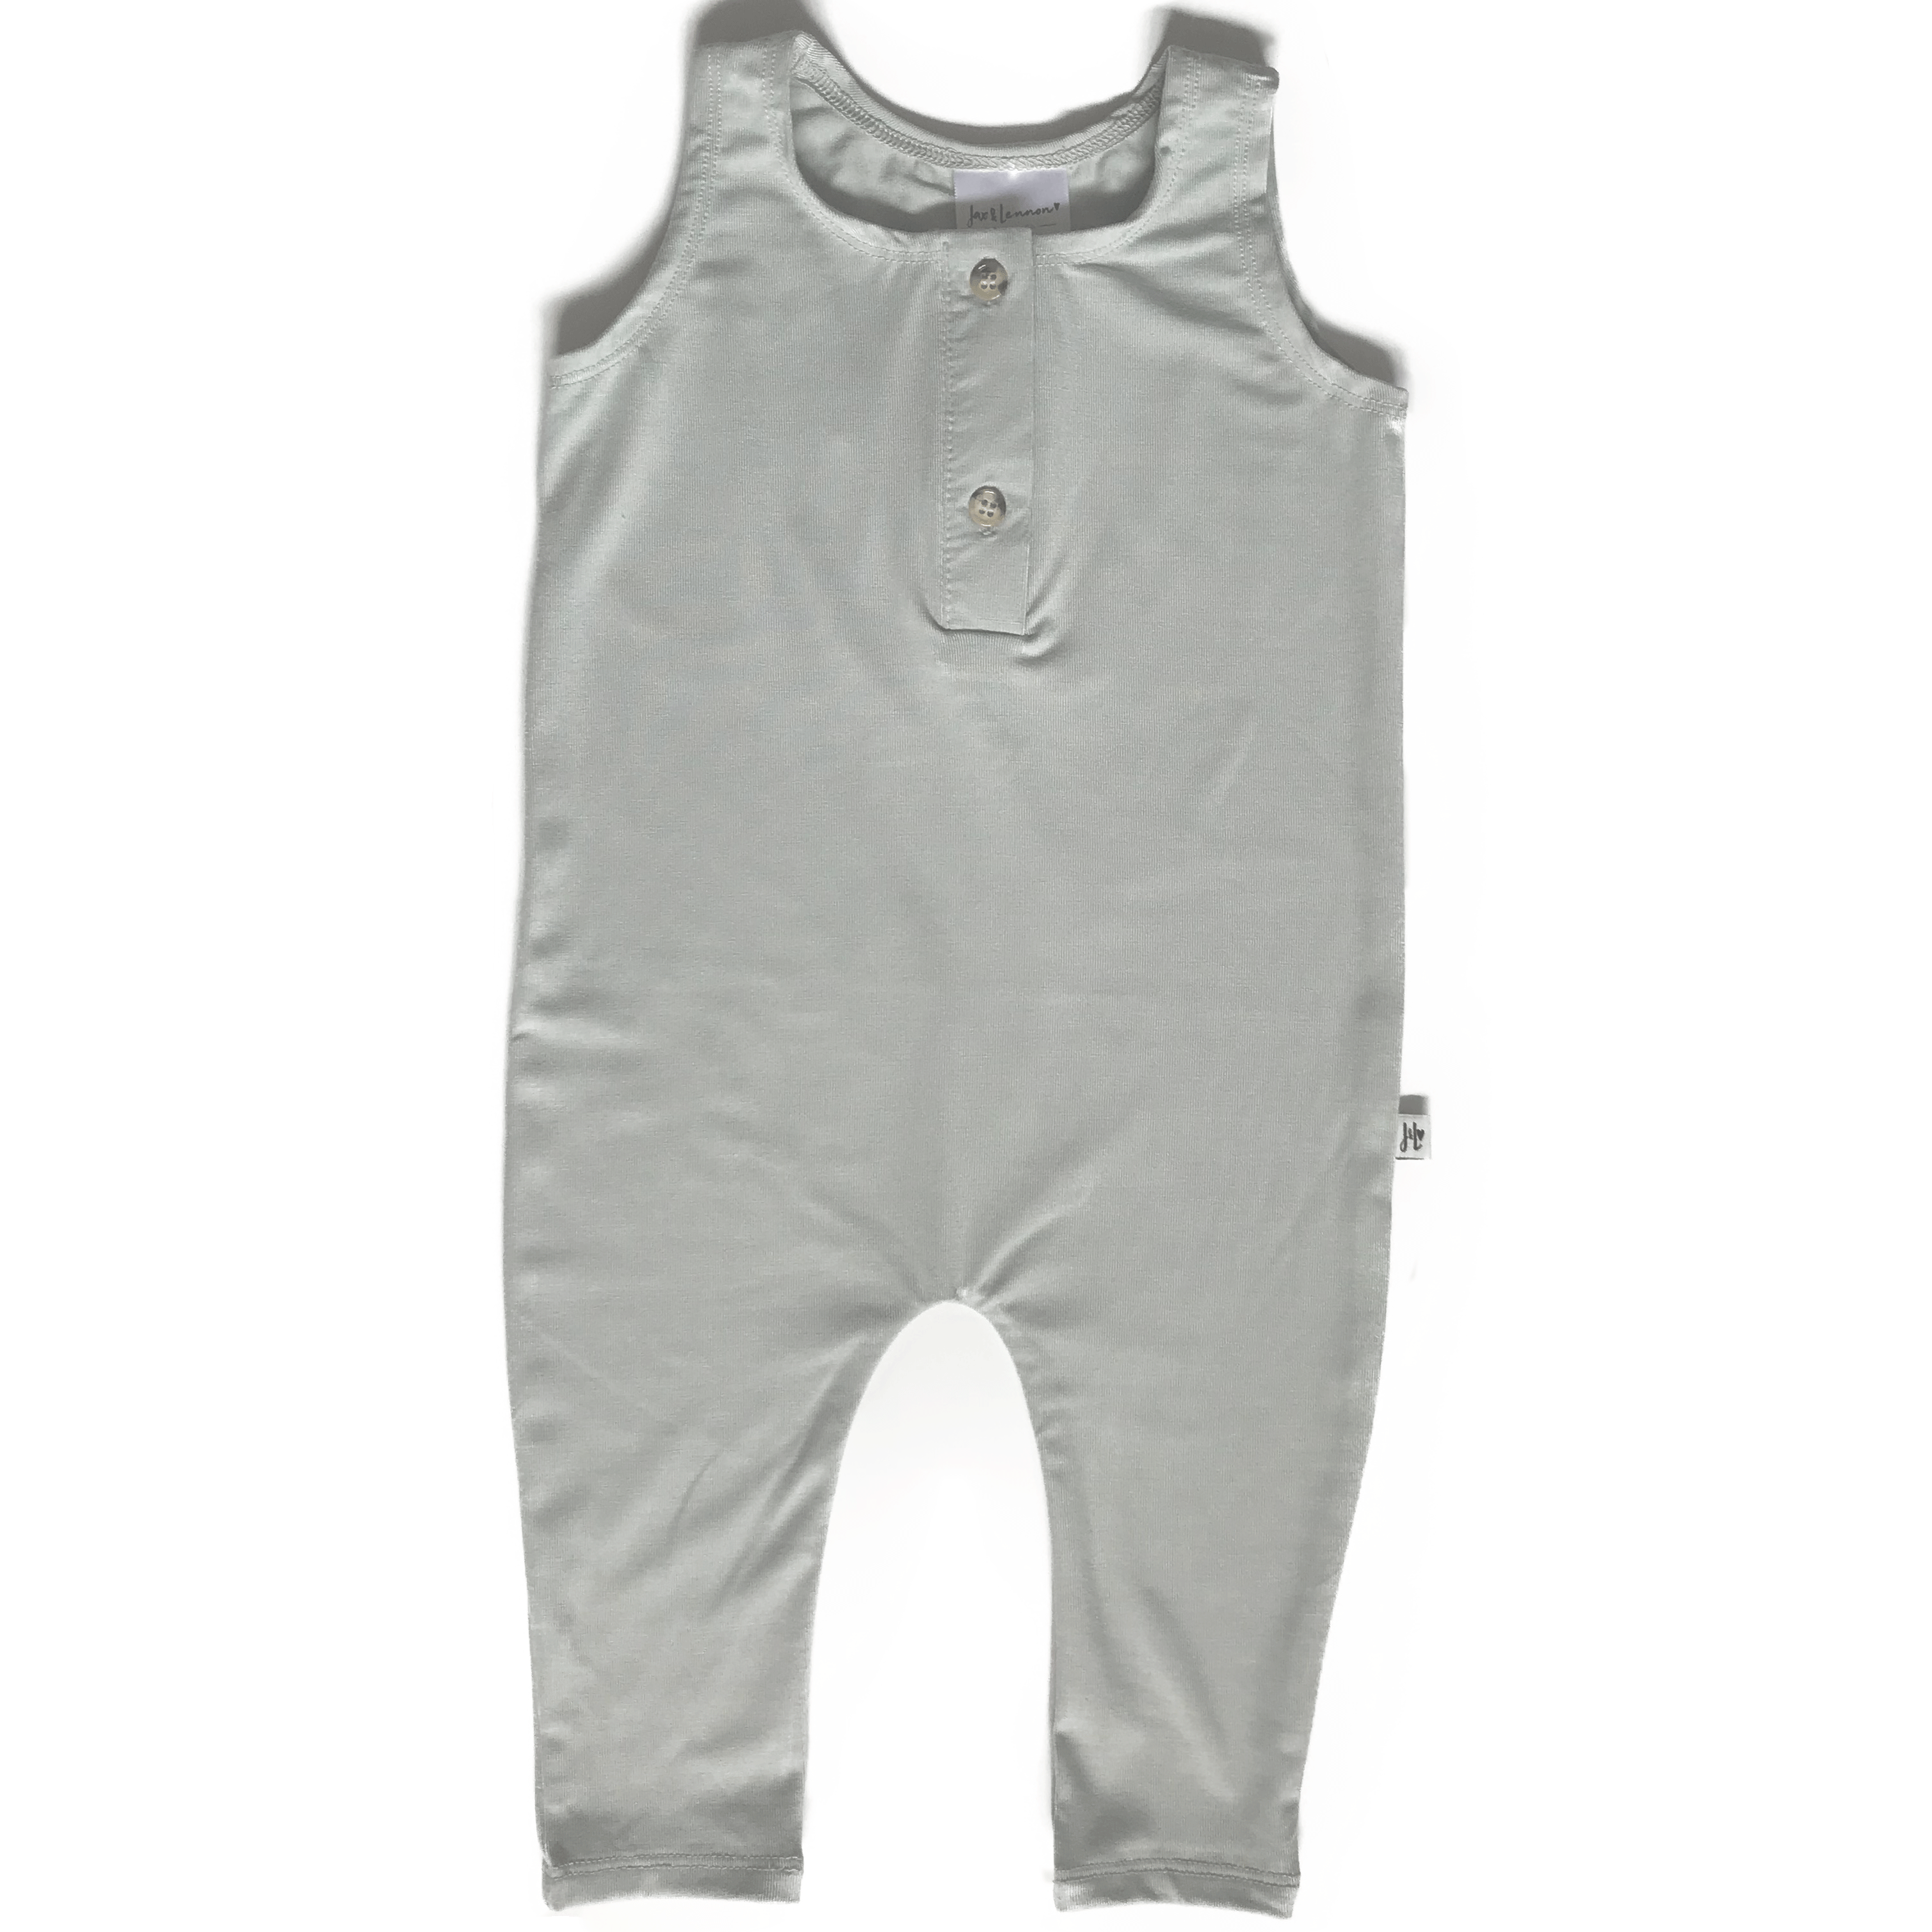 Natural Bamboo Jersey Baby Romper at Bonjour Baby Baskets